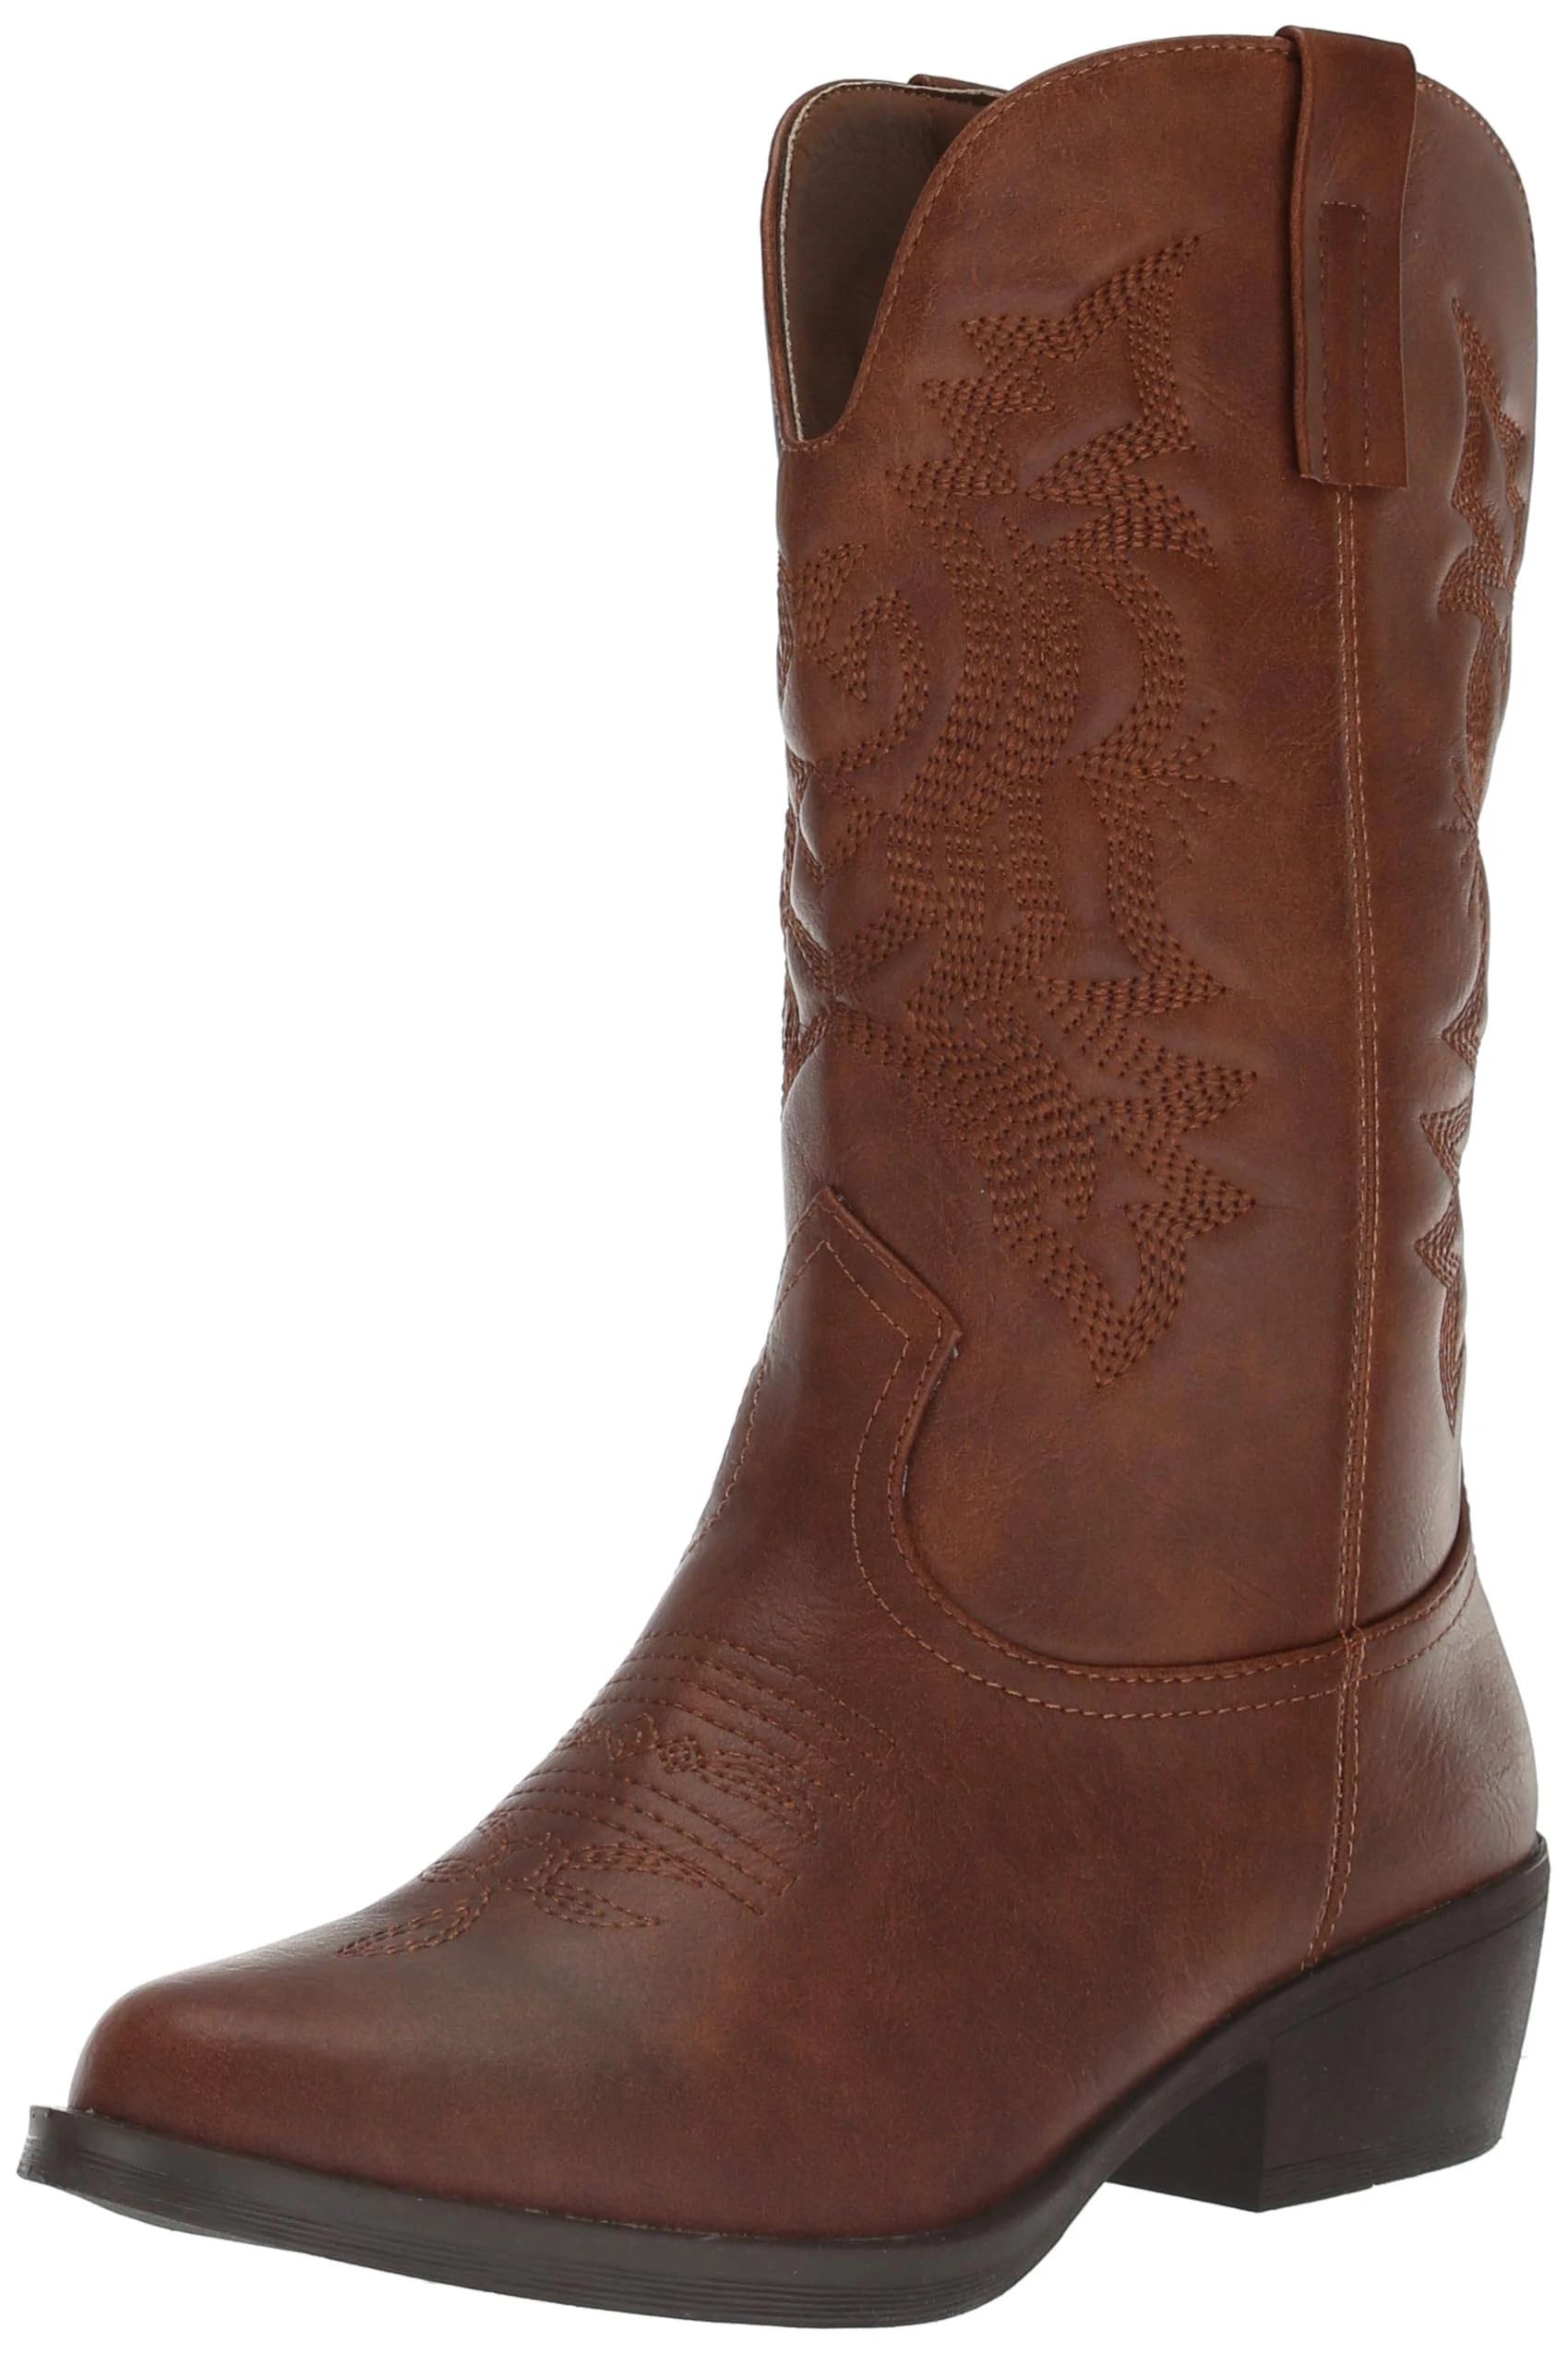 Affordable Cowgirl Boots with Comfortable Padding | Image